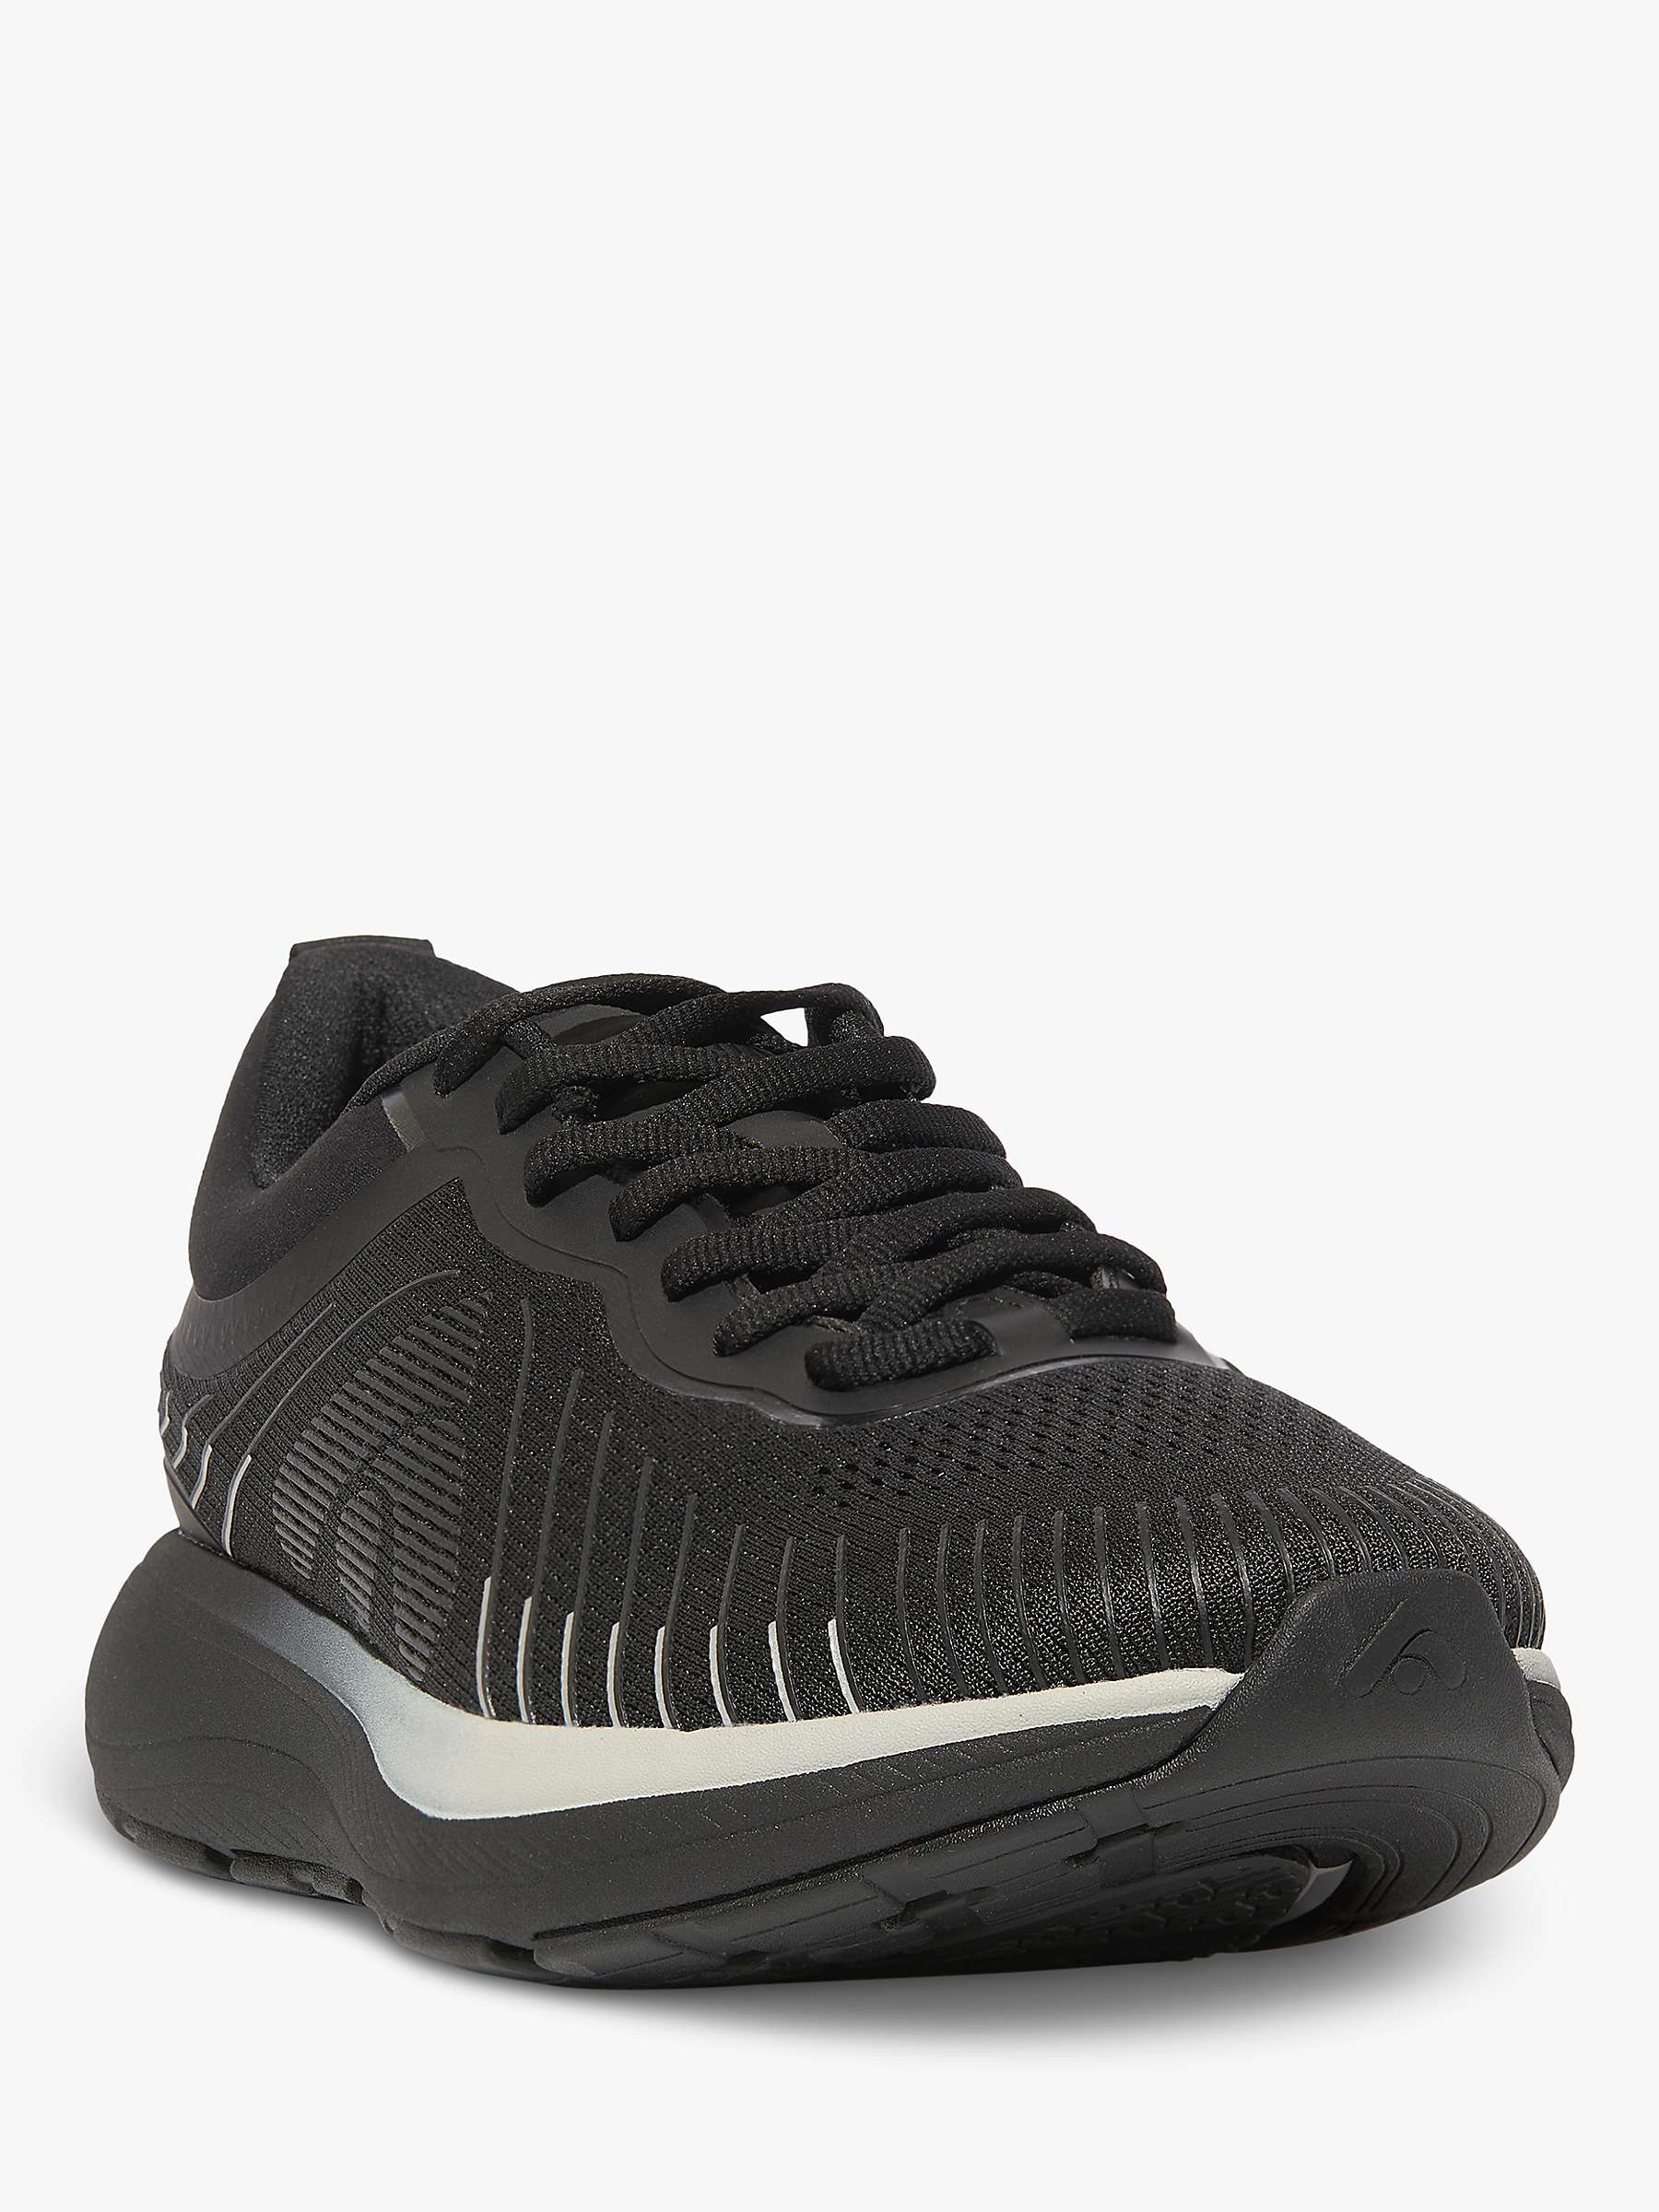 Buy FitFlop Performance Running Trainers, Black Online at johnlewis.com